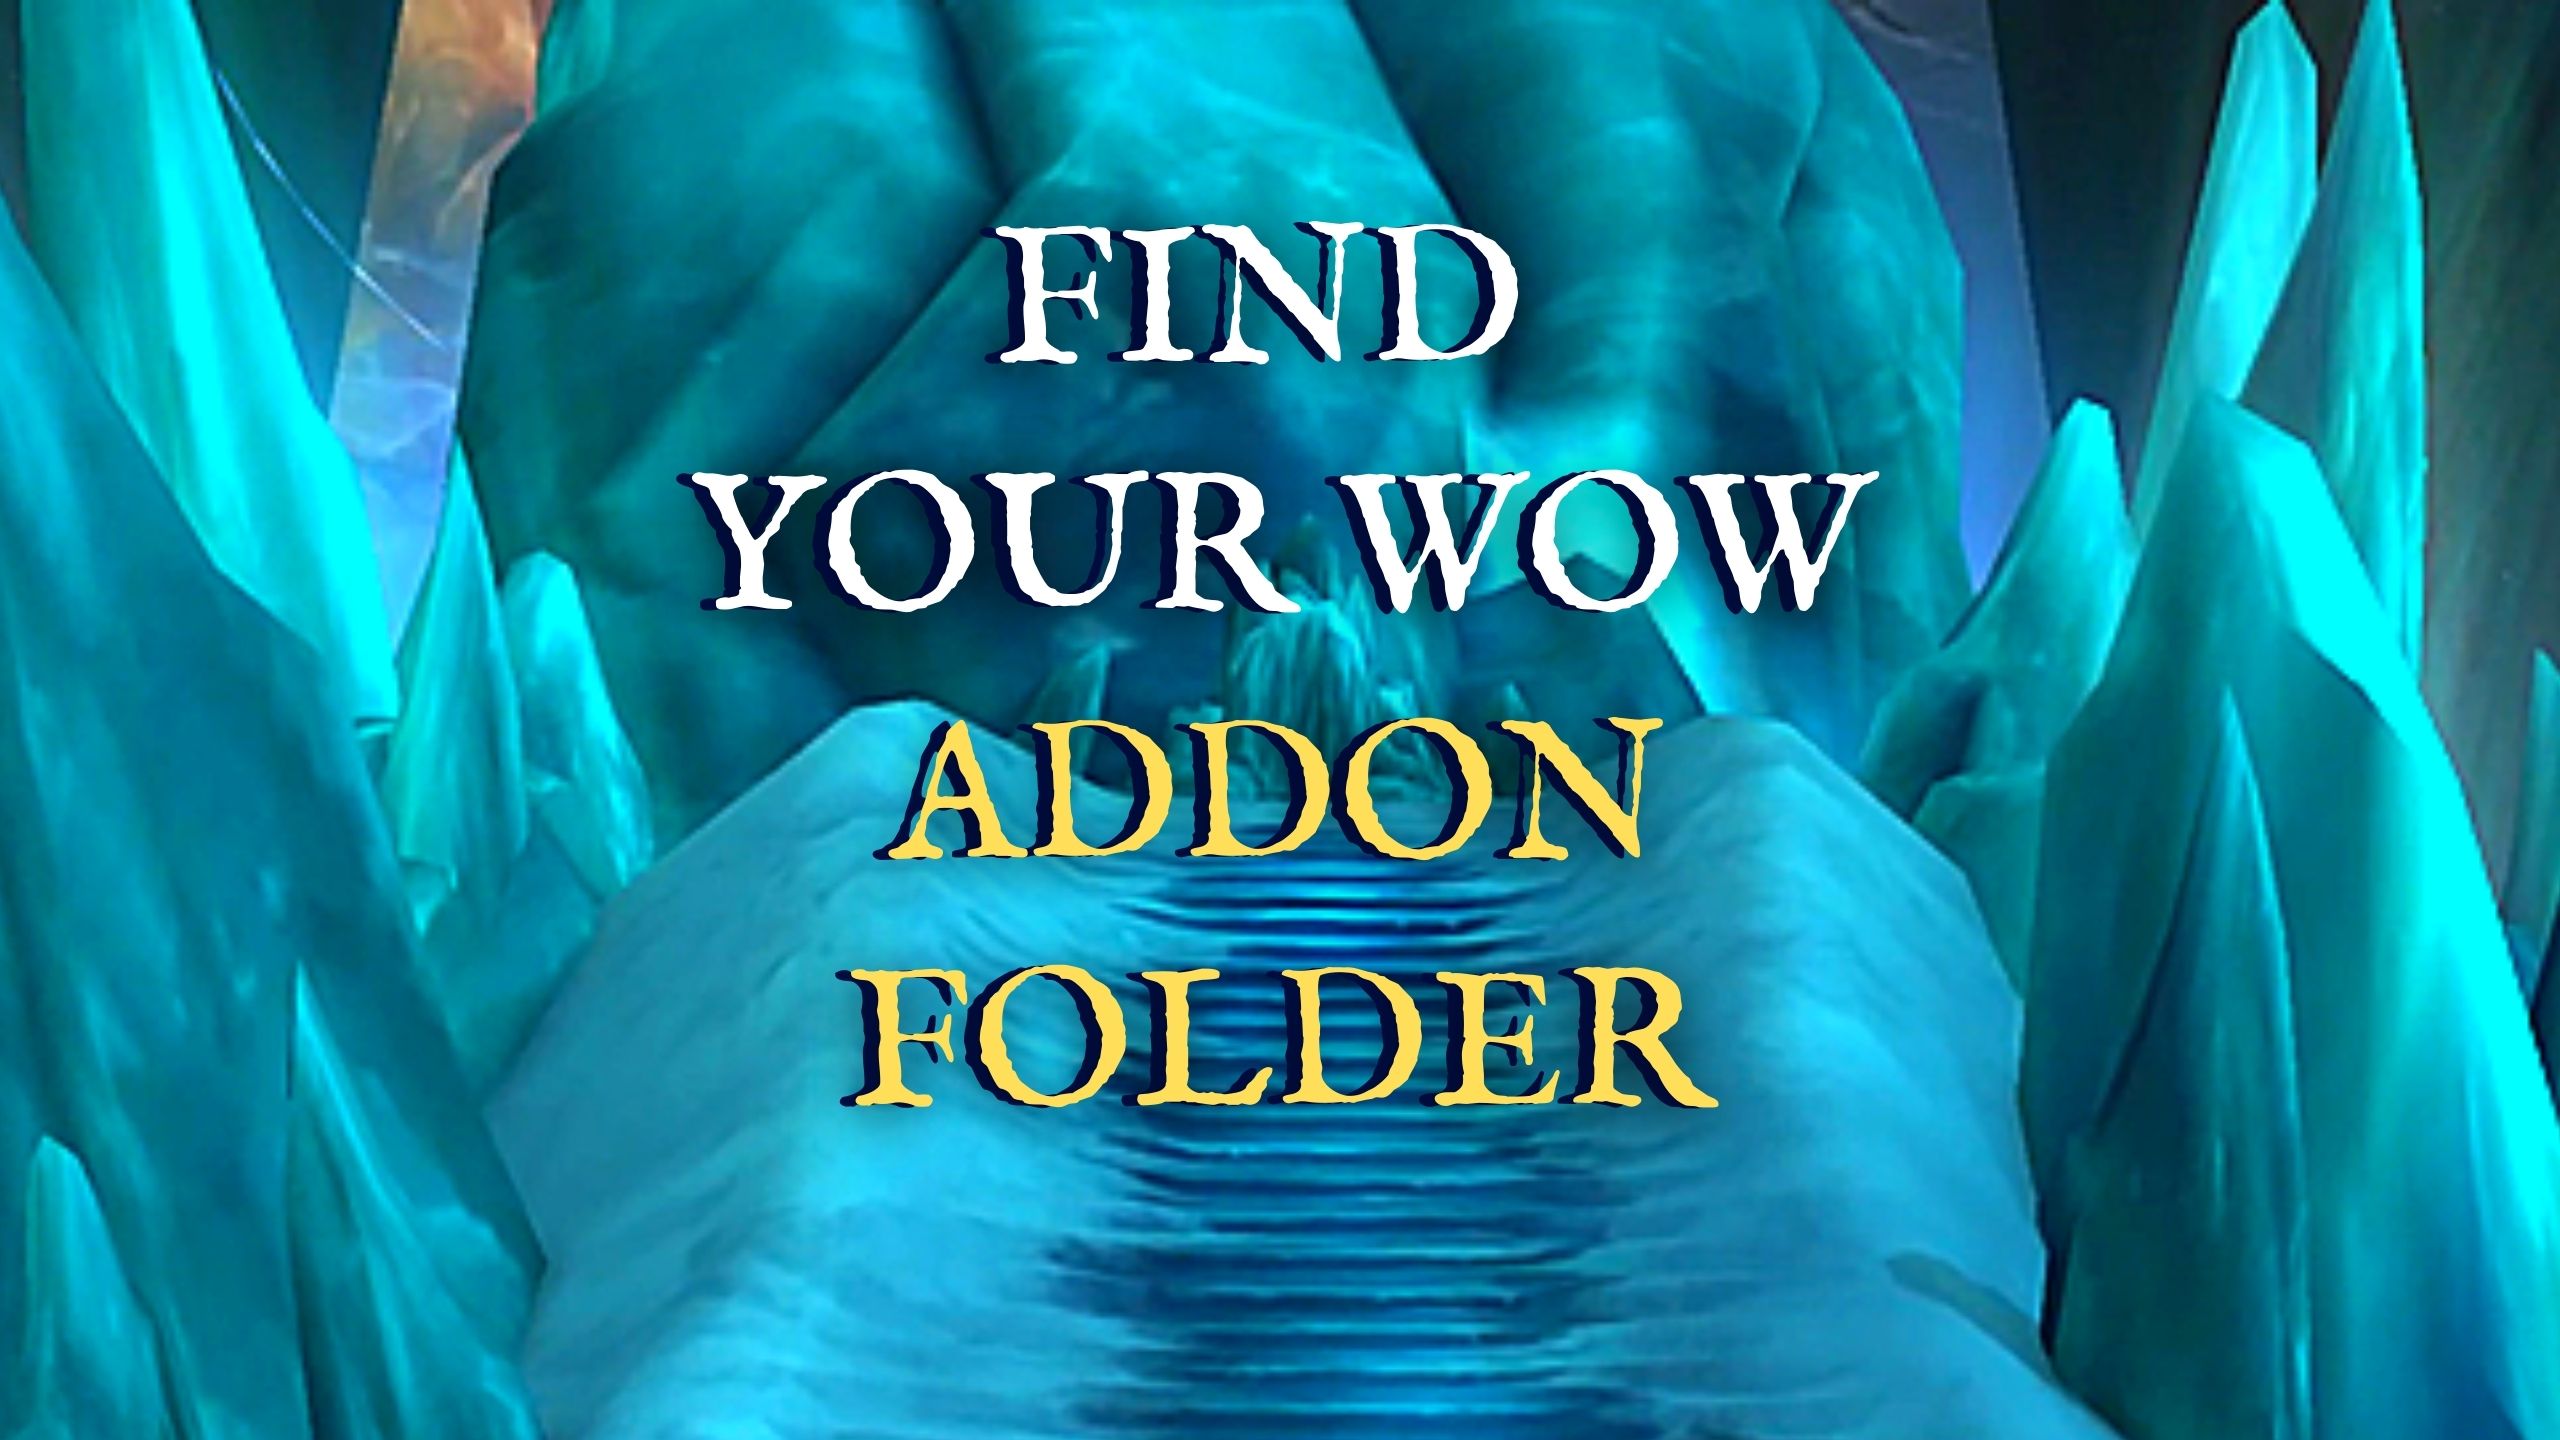 wow where is my addons folder located